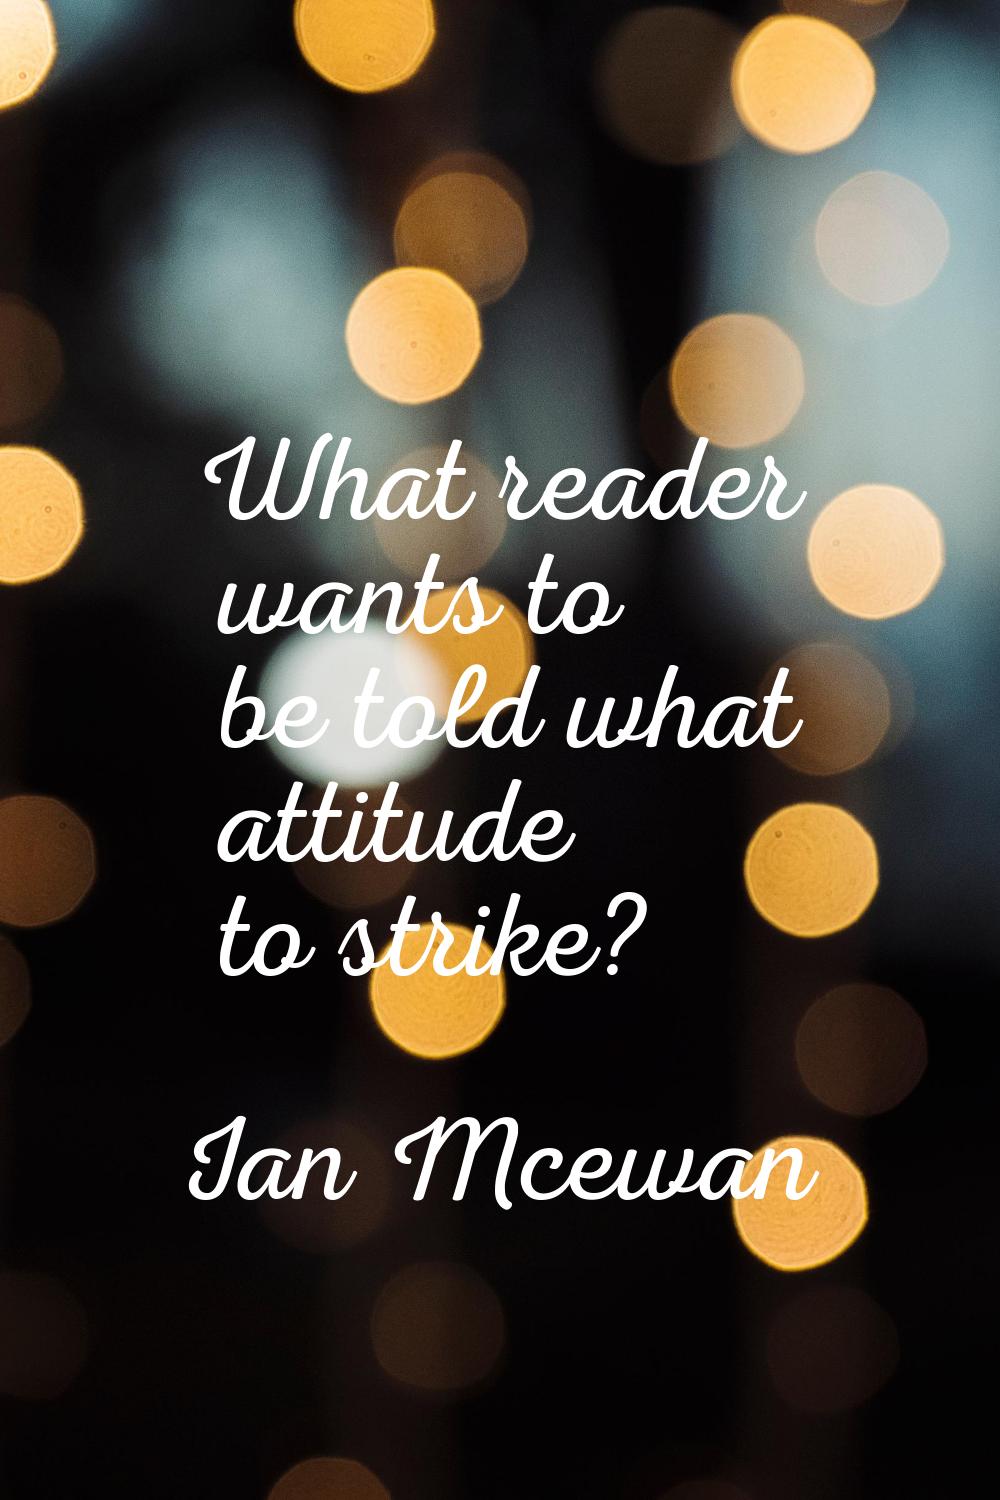 What reader wants to be told what attitude to strike?